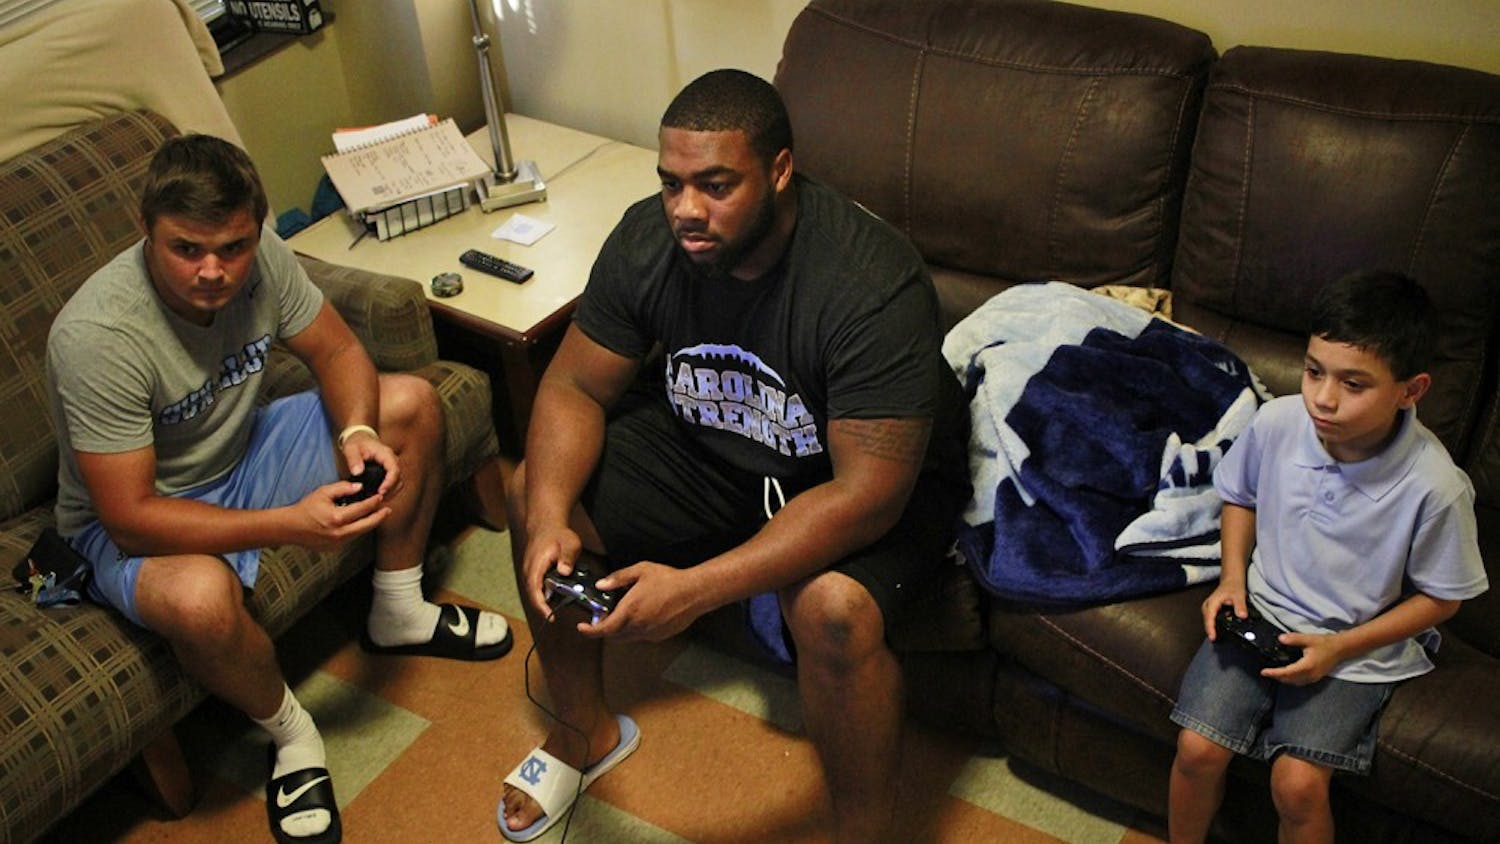 Nathan Elliott (left), a sophomore sports administration major, and Aaron Crawford (middle), a sophomore undecided major, play Xbox with Frankie, Theresa's son (8 years old). 